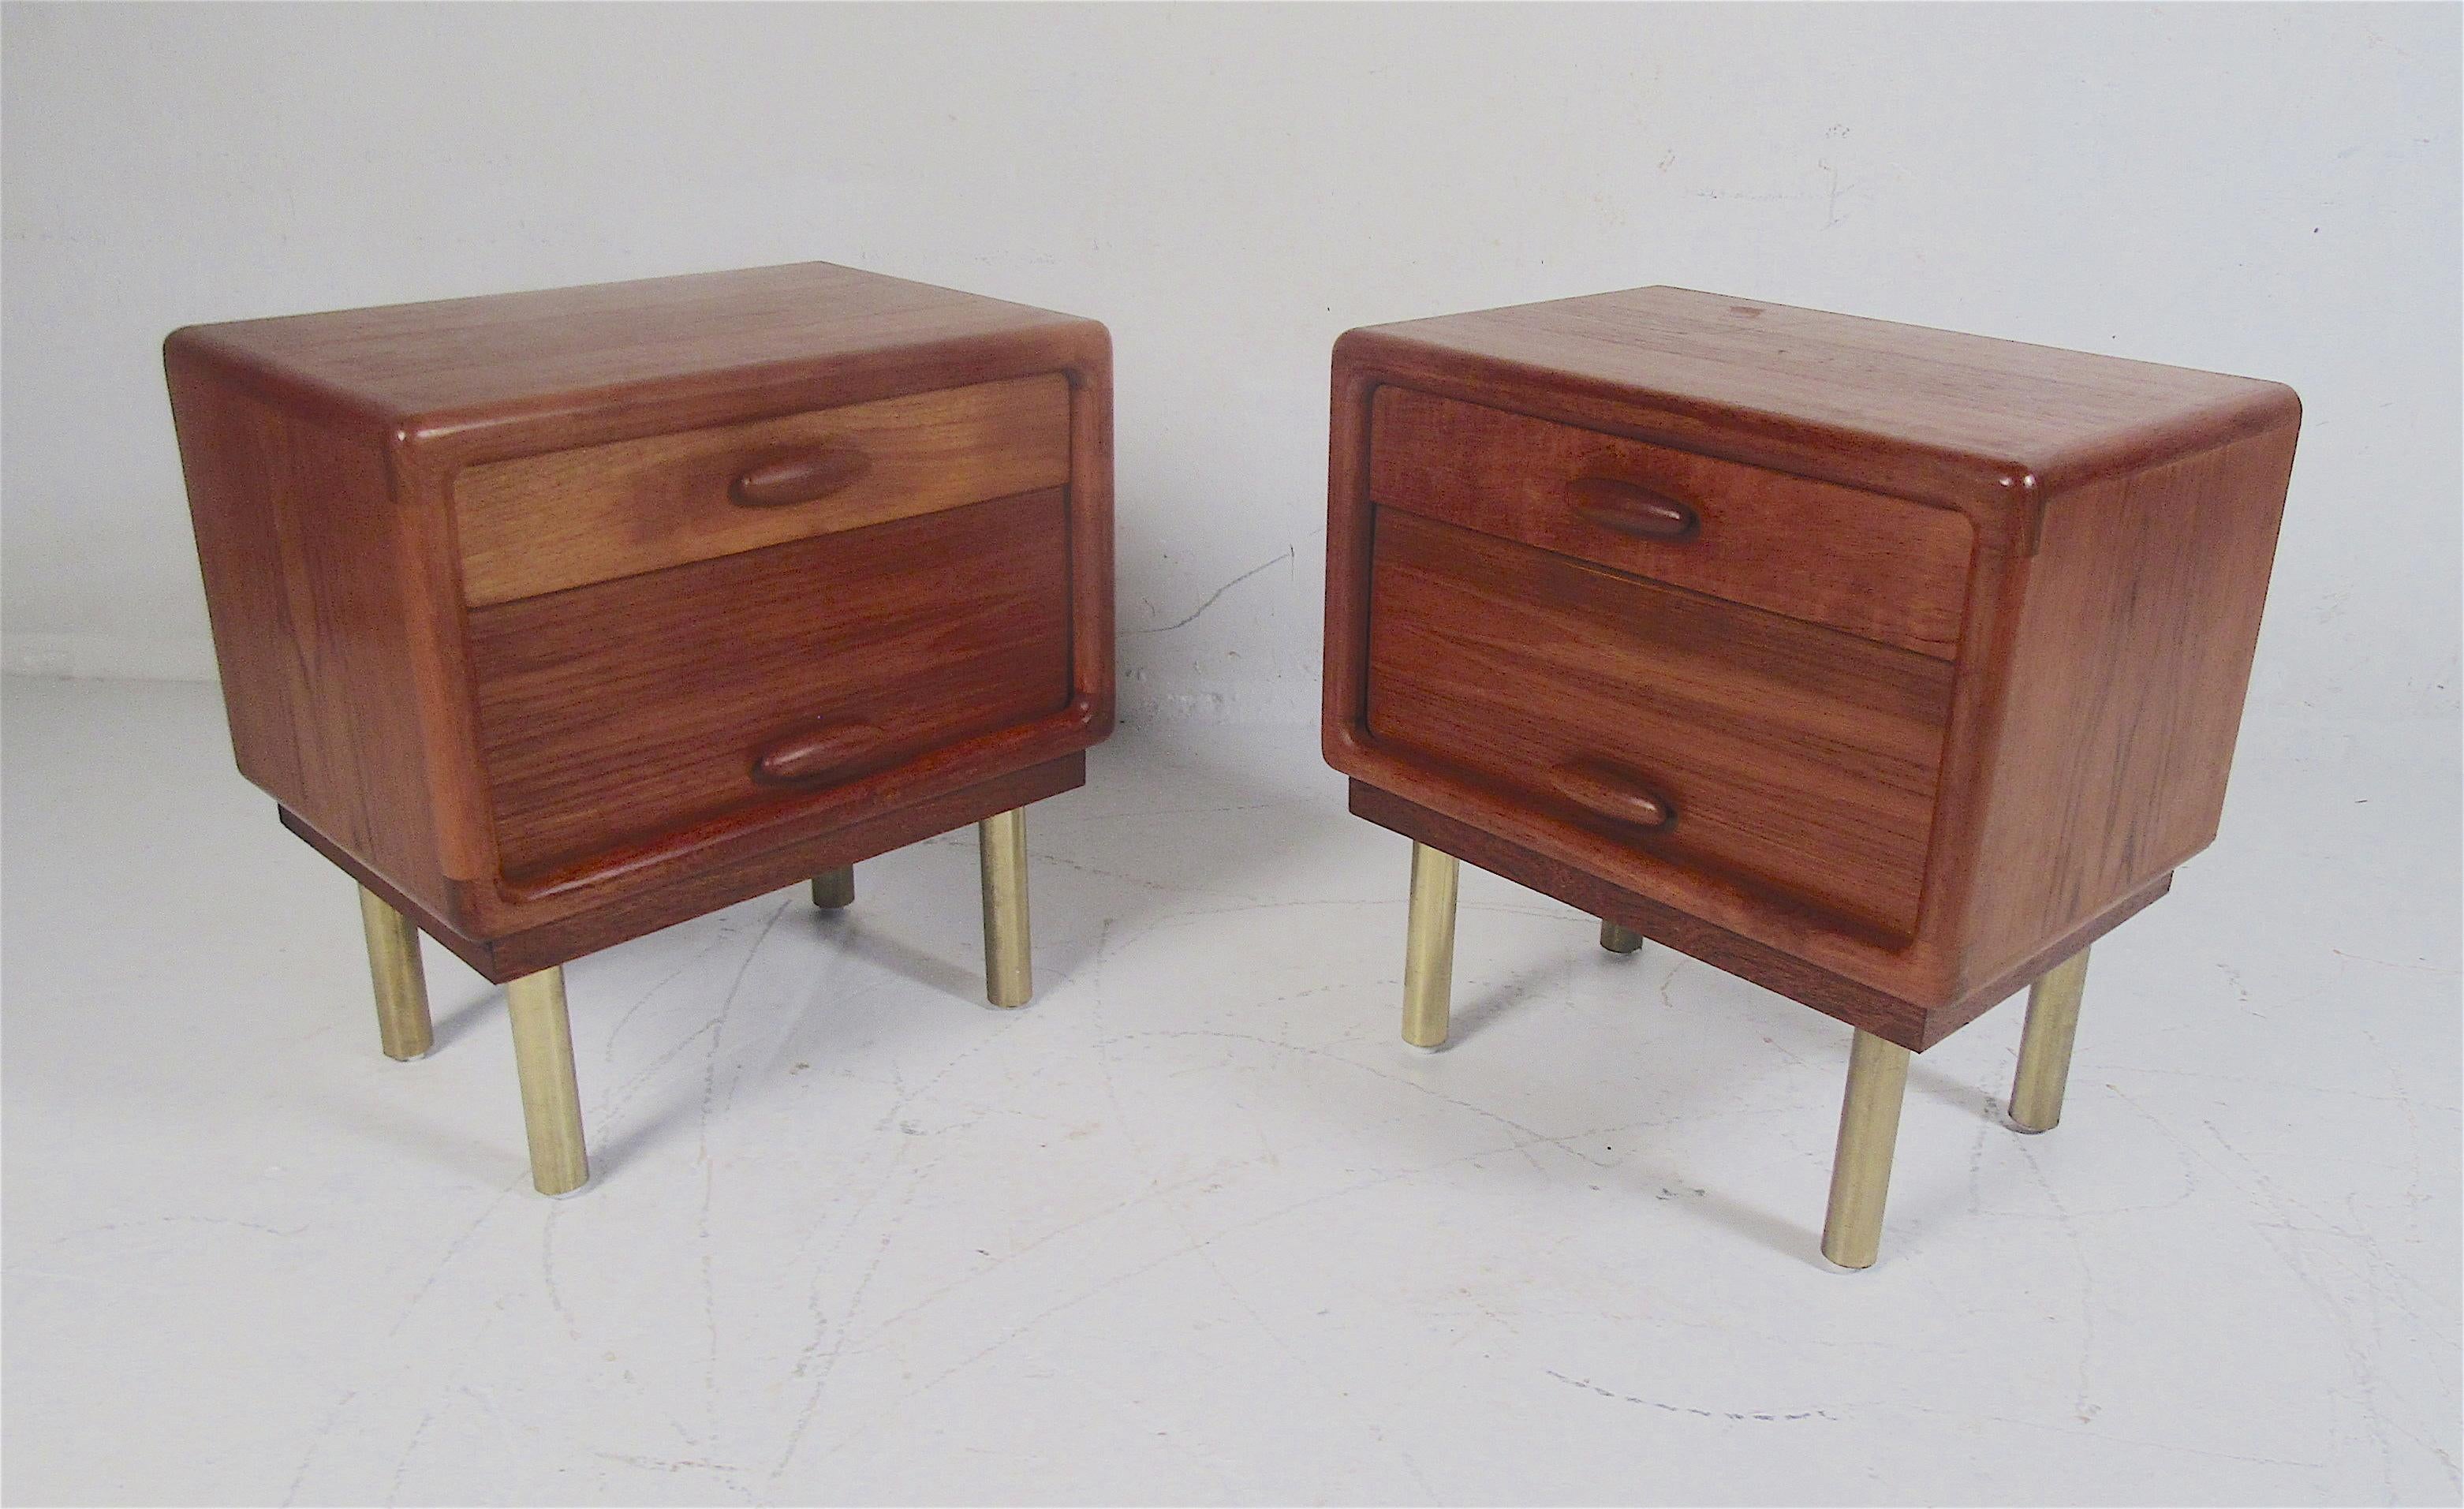 This stunning pair of vintage modern nightstands feature cylindrical metal legs and elegant teak wood grain. A unique design with one large drawer and a roll-up tambour door. The sculpted drawer pulls and semi-finished back show quality